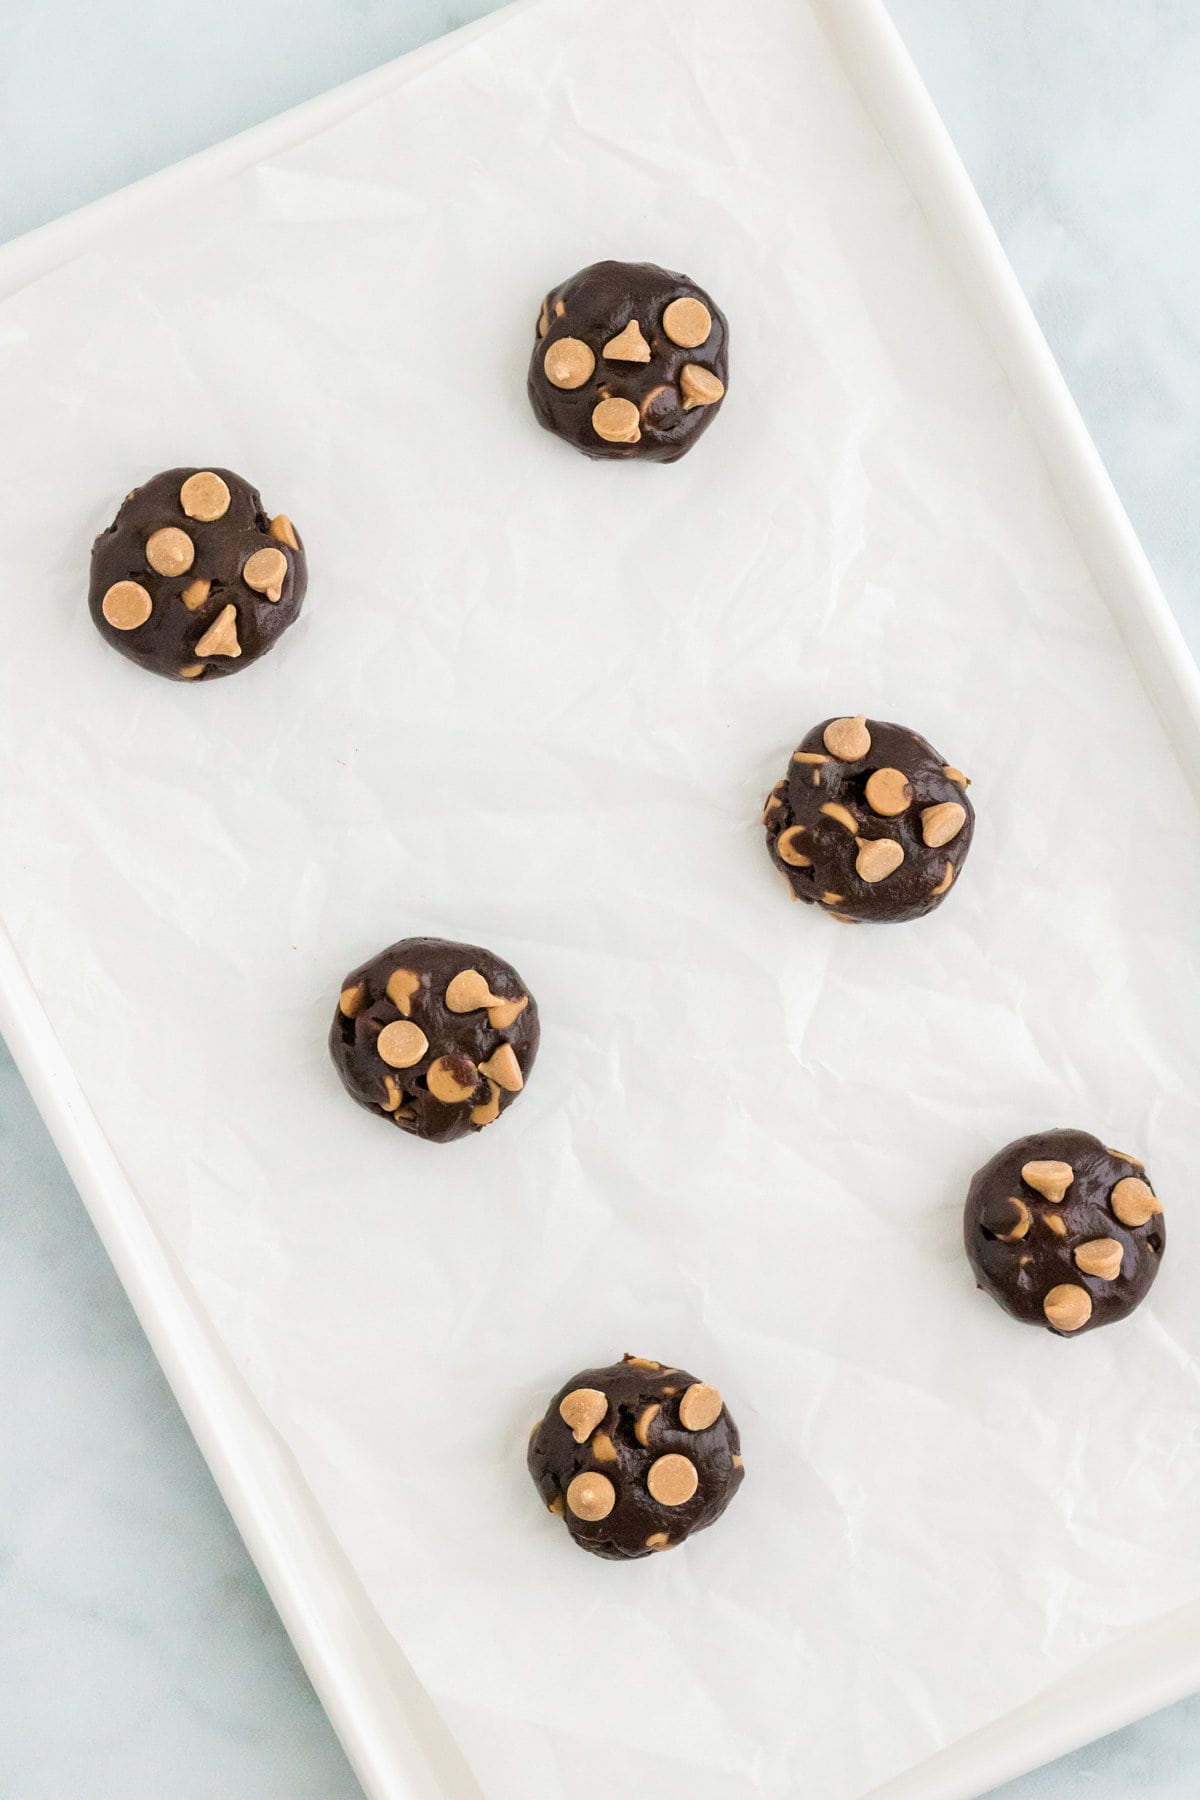 Six balls of chocolate cookie dough with peanut butter chips pressed into the tops spaced apart on a parchment-lined baking sheet.